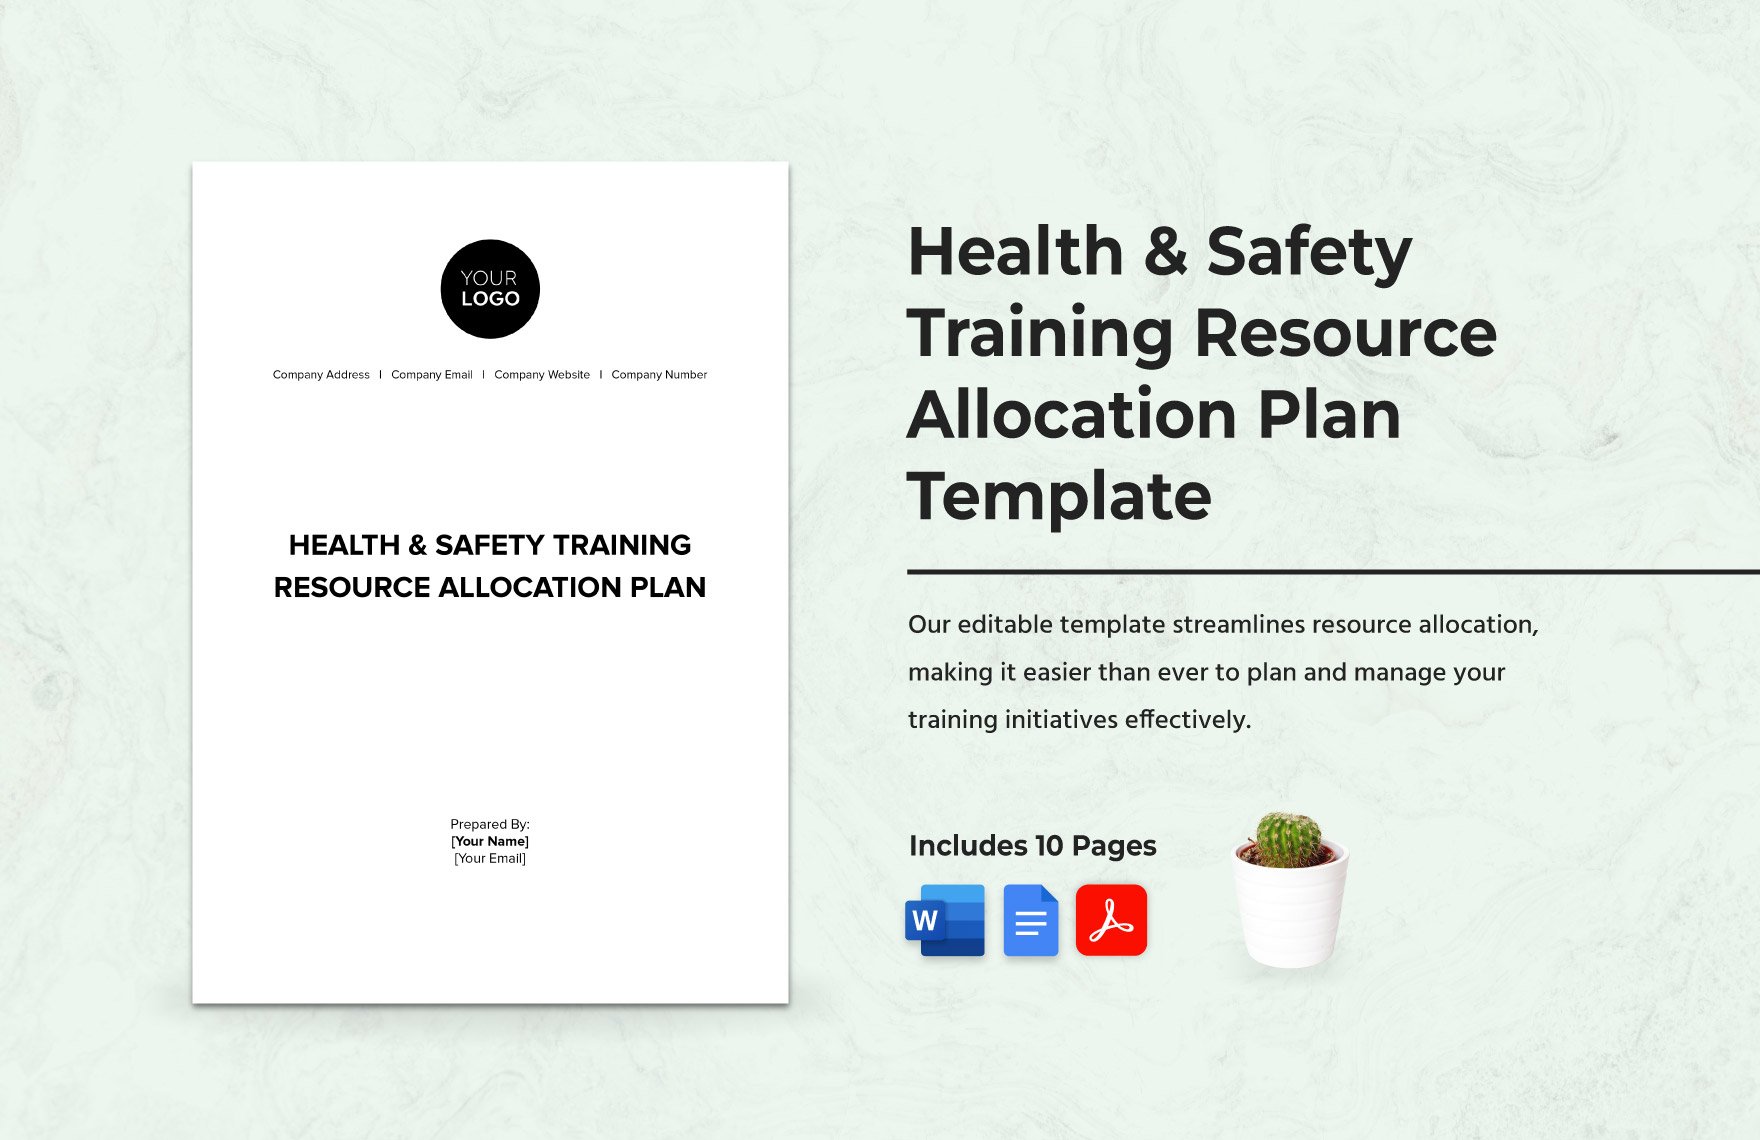 Health & Safety Training Resource Allocation Plan Template